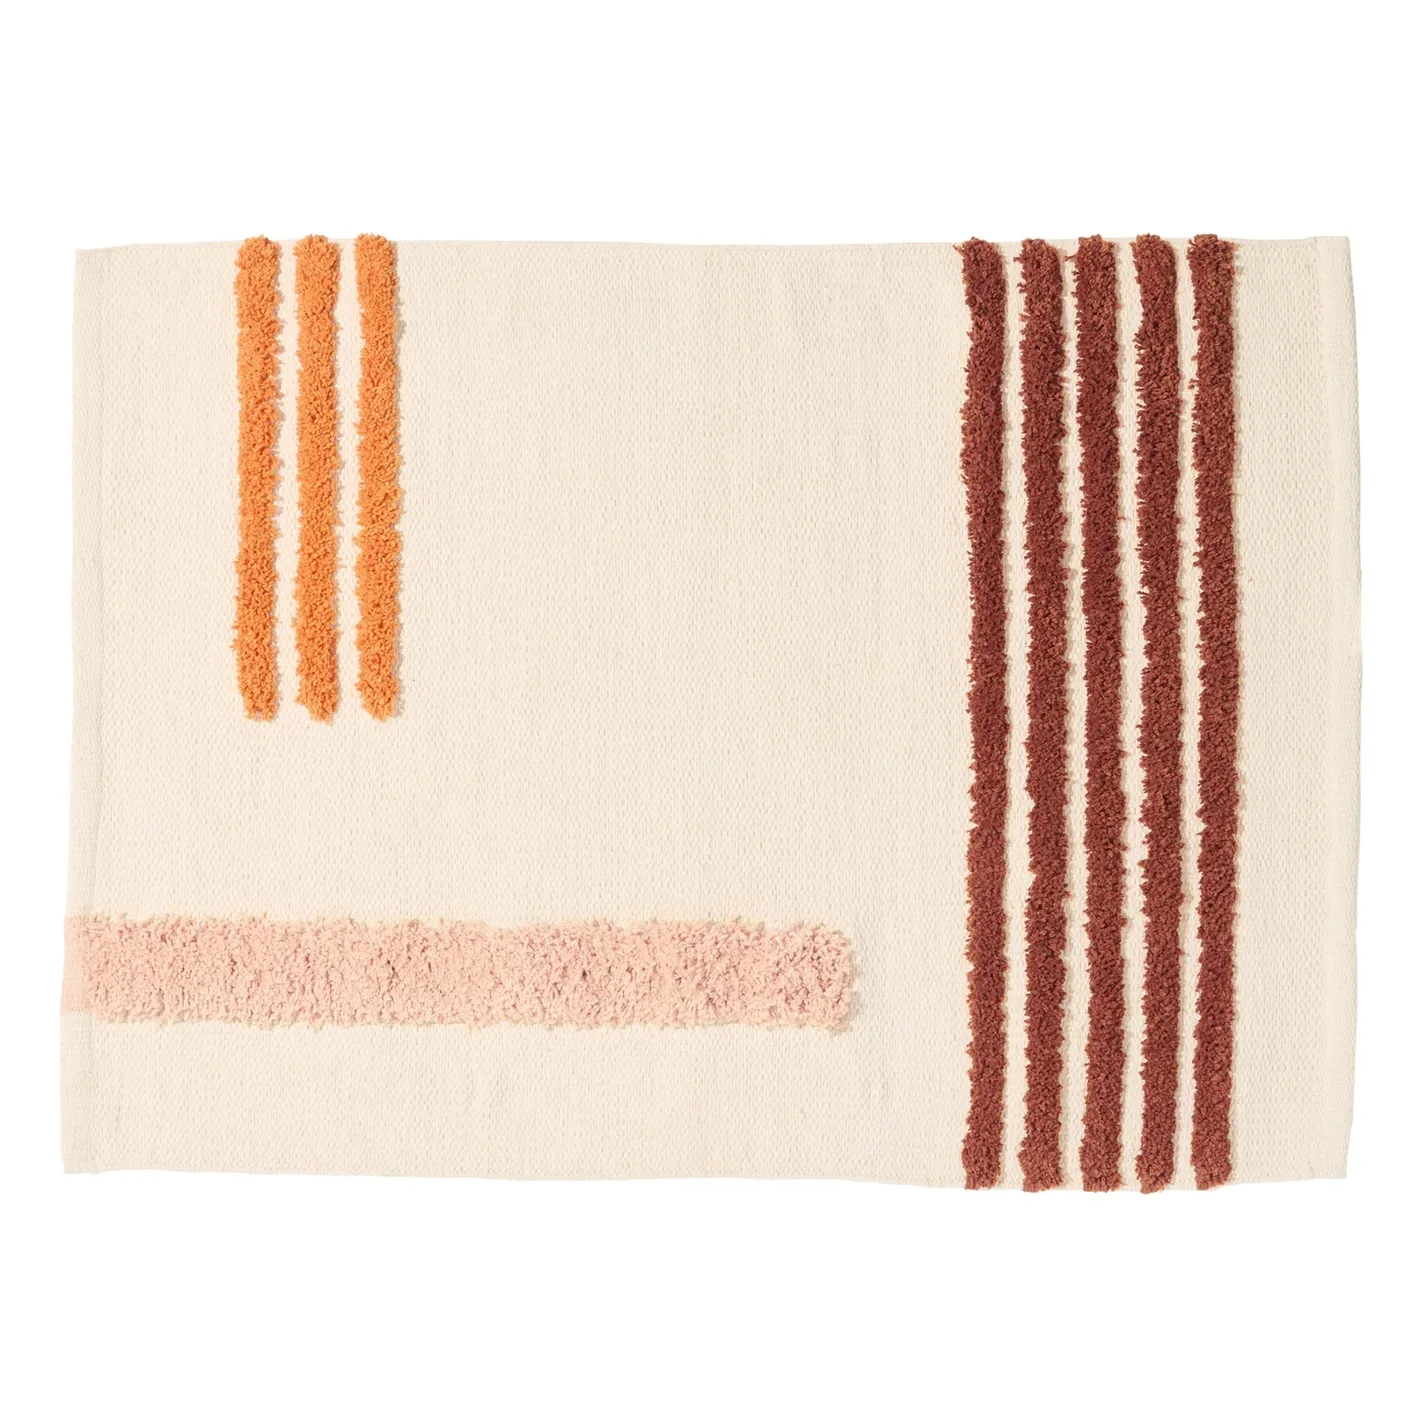 These Rugs Inspired by Ribbons Top Our List of Favorite April Launches